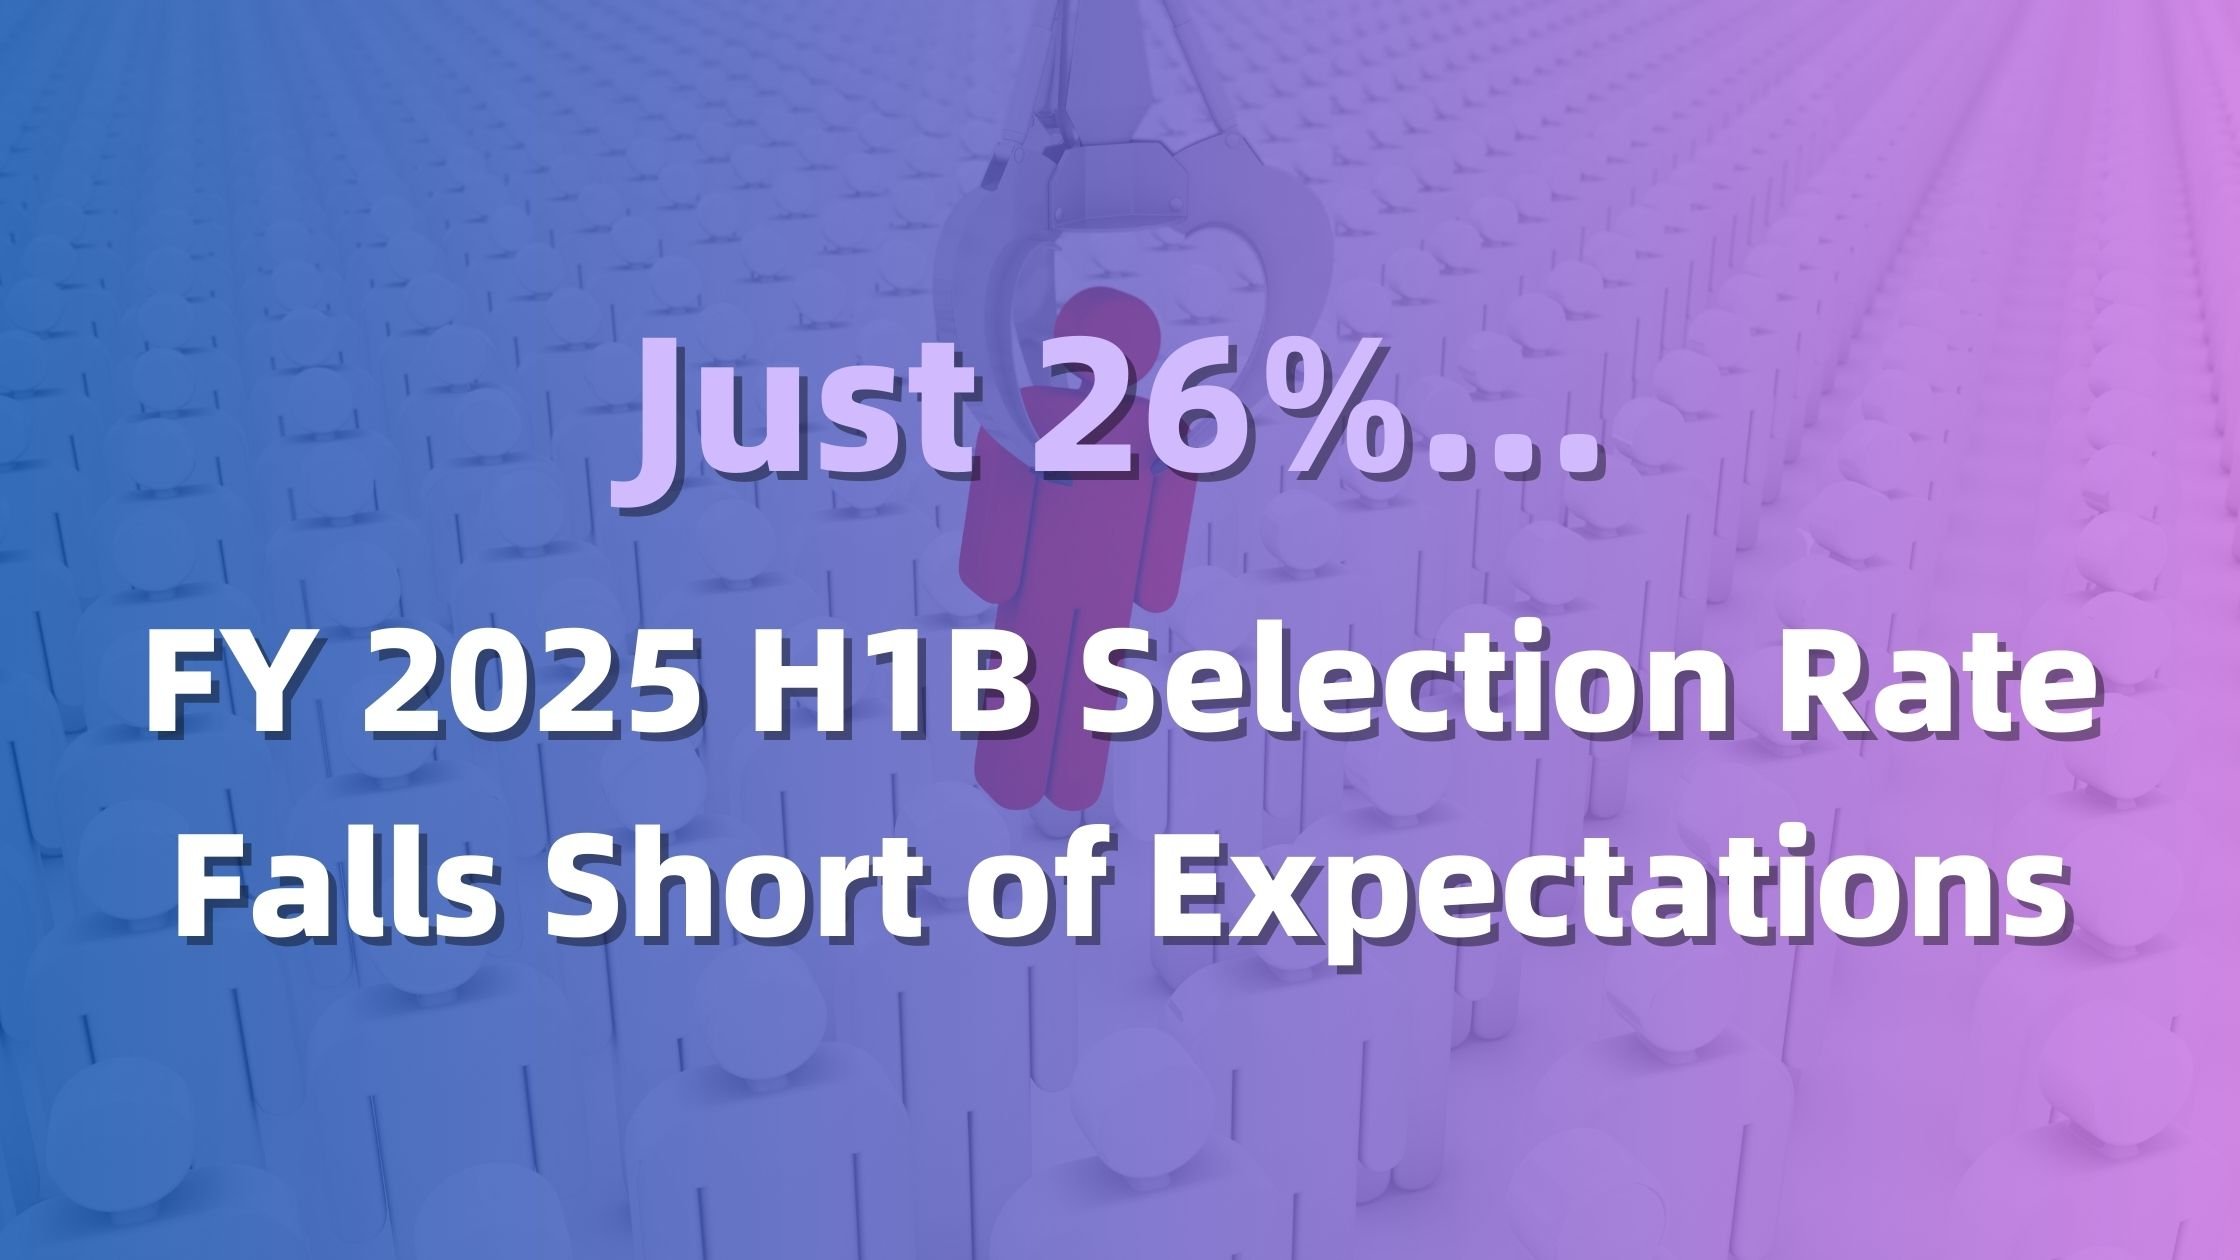 FY2025 H1B Selection Rate